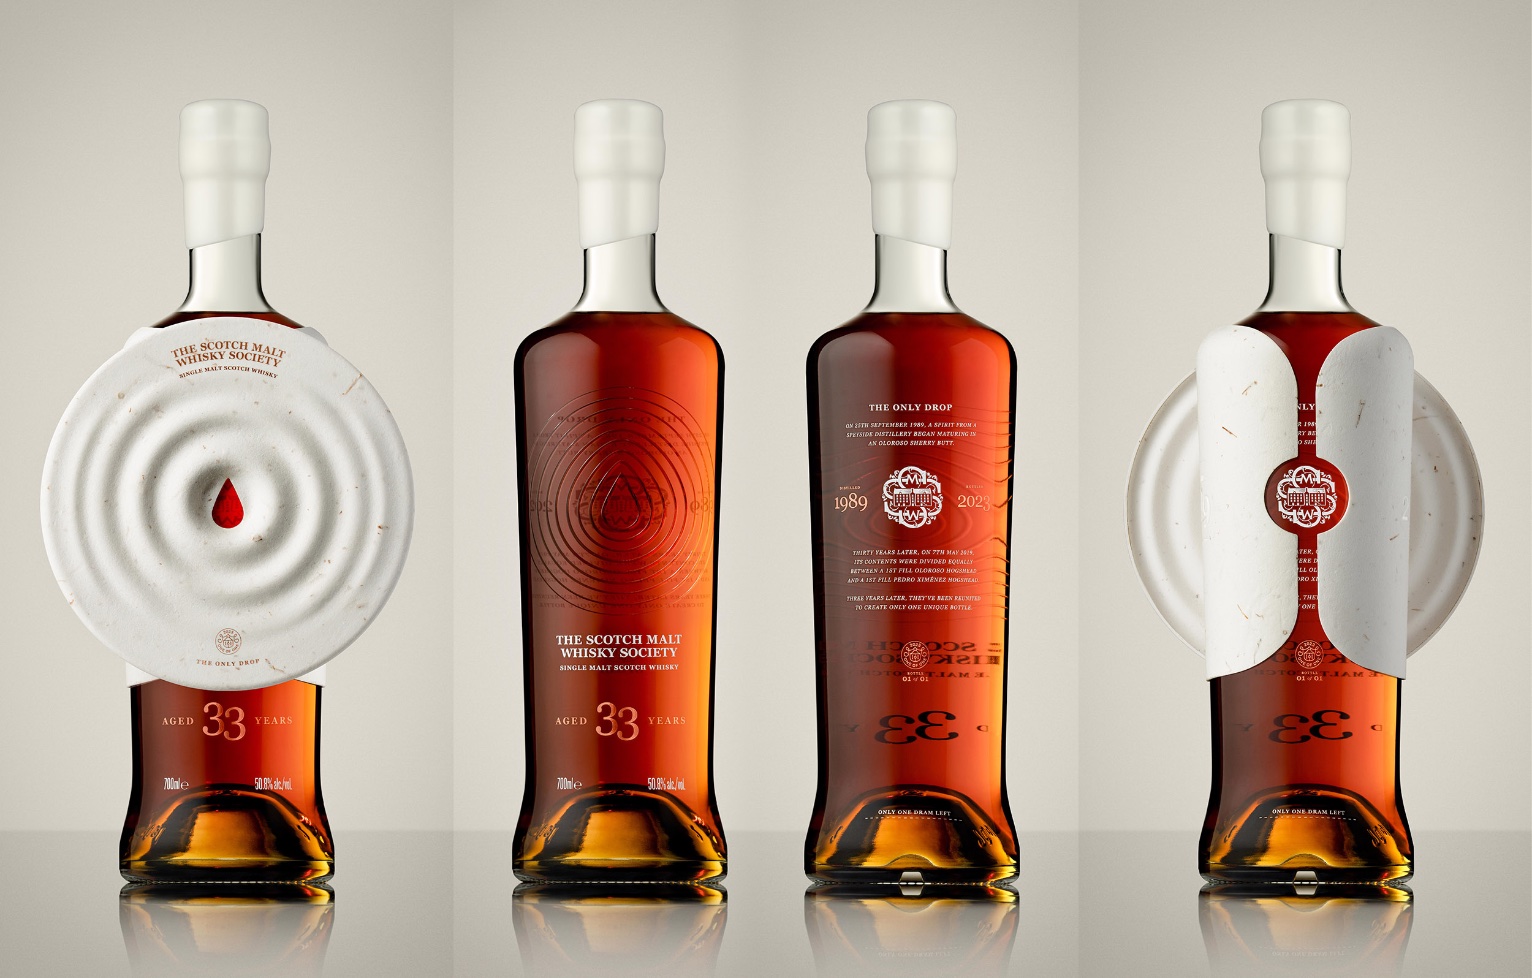 The Only Drop Is The Never-To-Be-Repeated Whisky Release